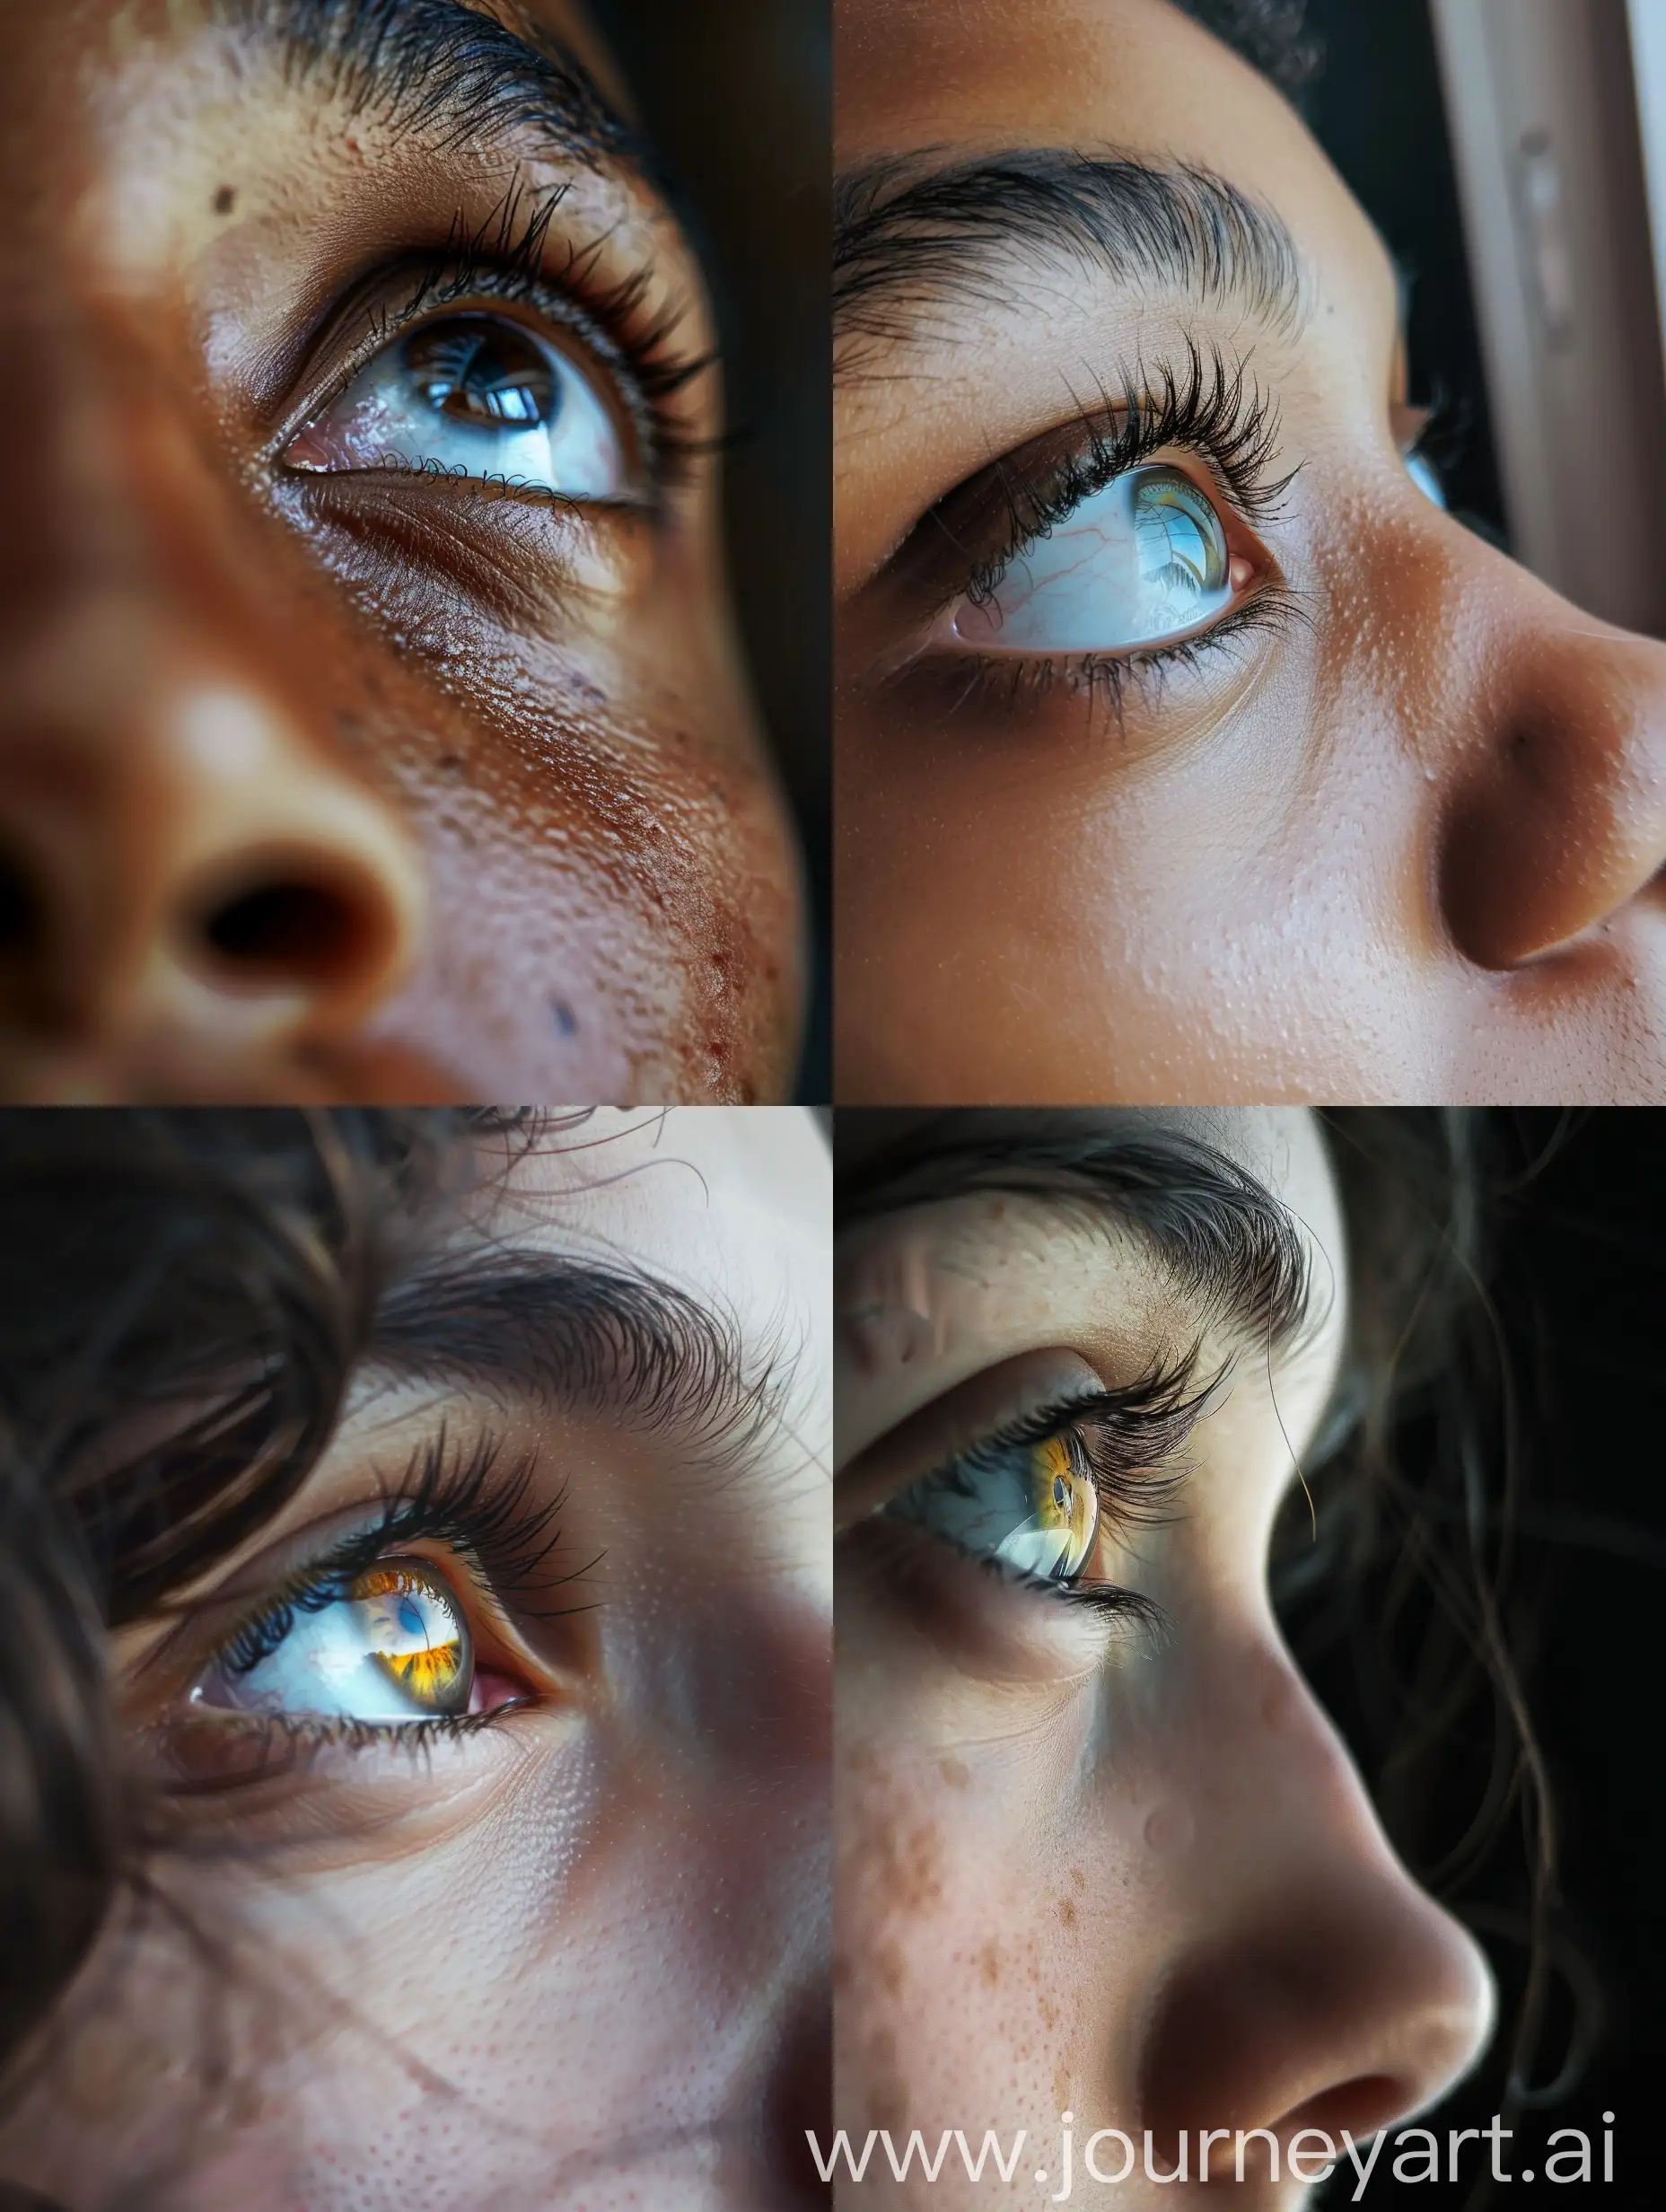 CloseUp-Portrait-of-Eyes-Filled-with-Dreams-and-Hope